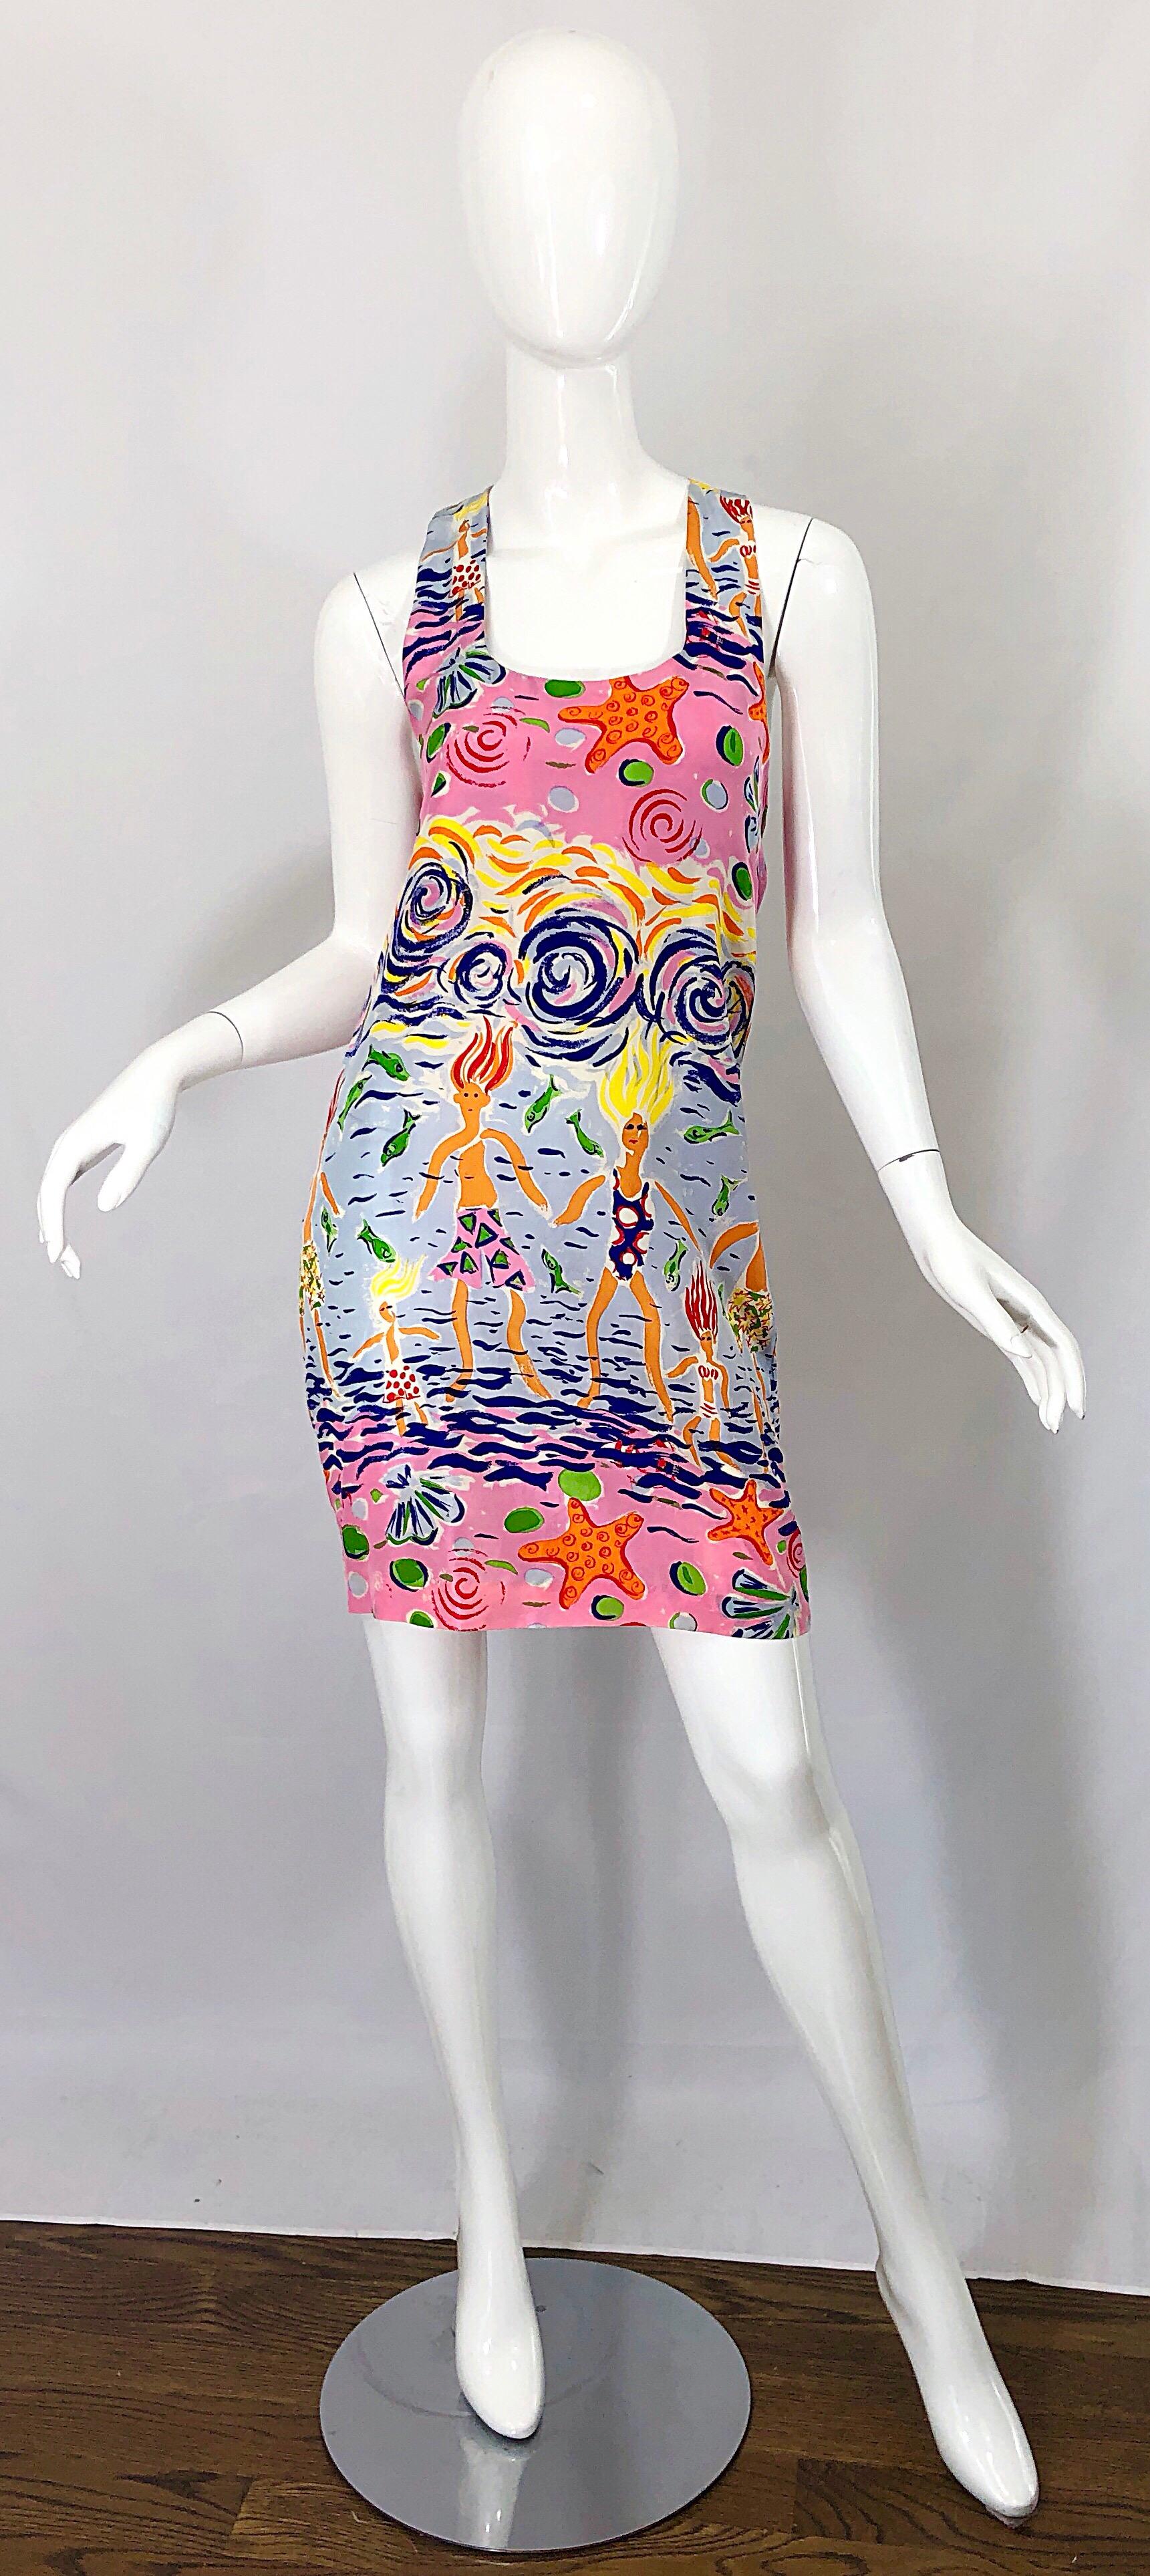 Rare early 1990s PETER MUI / MUI MUI novelty print silk racerback dress! Mui pieces are super hard to find, as the designer was very particular with choosing only a select few famous tattoo artists for prints. 
This beauty features a family with